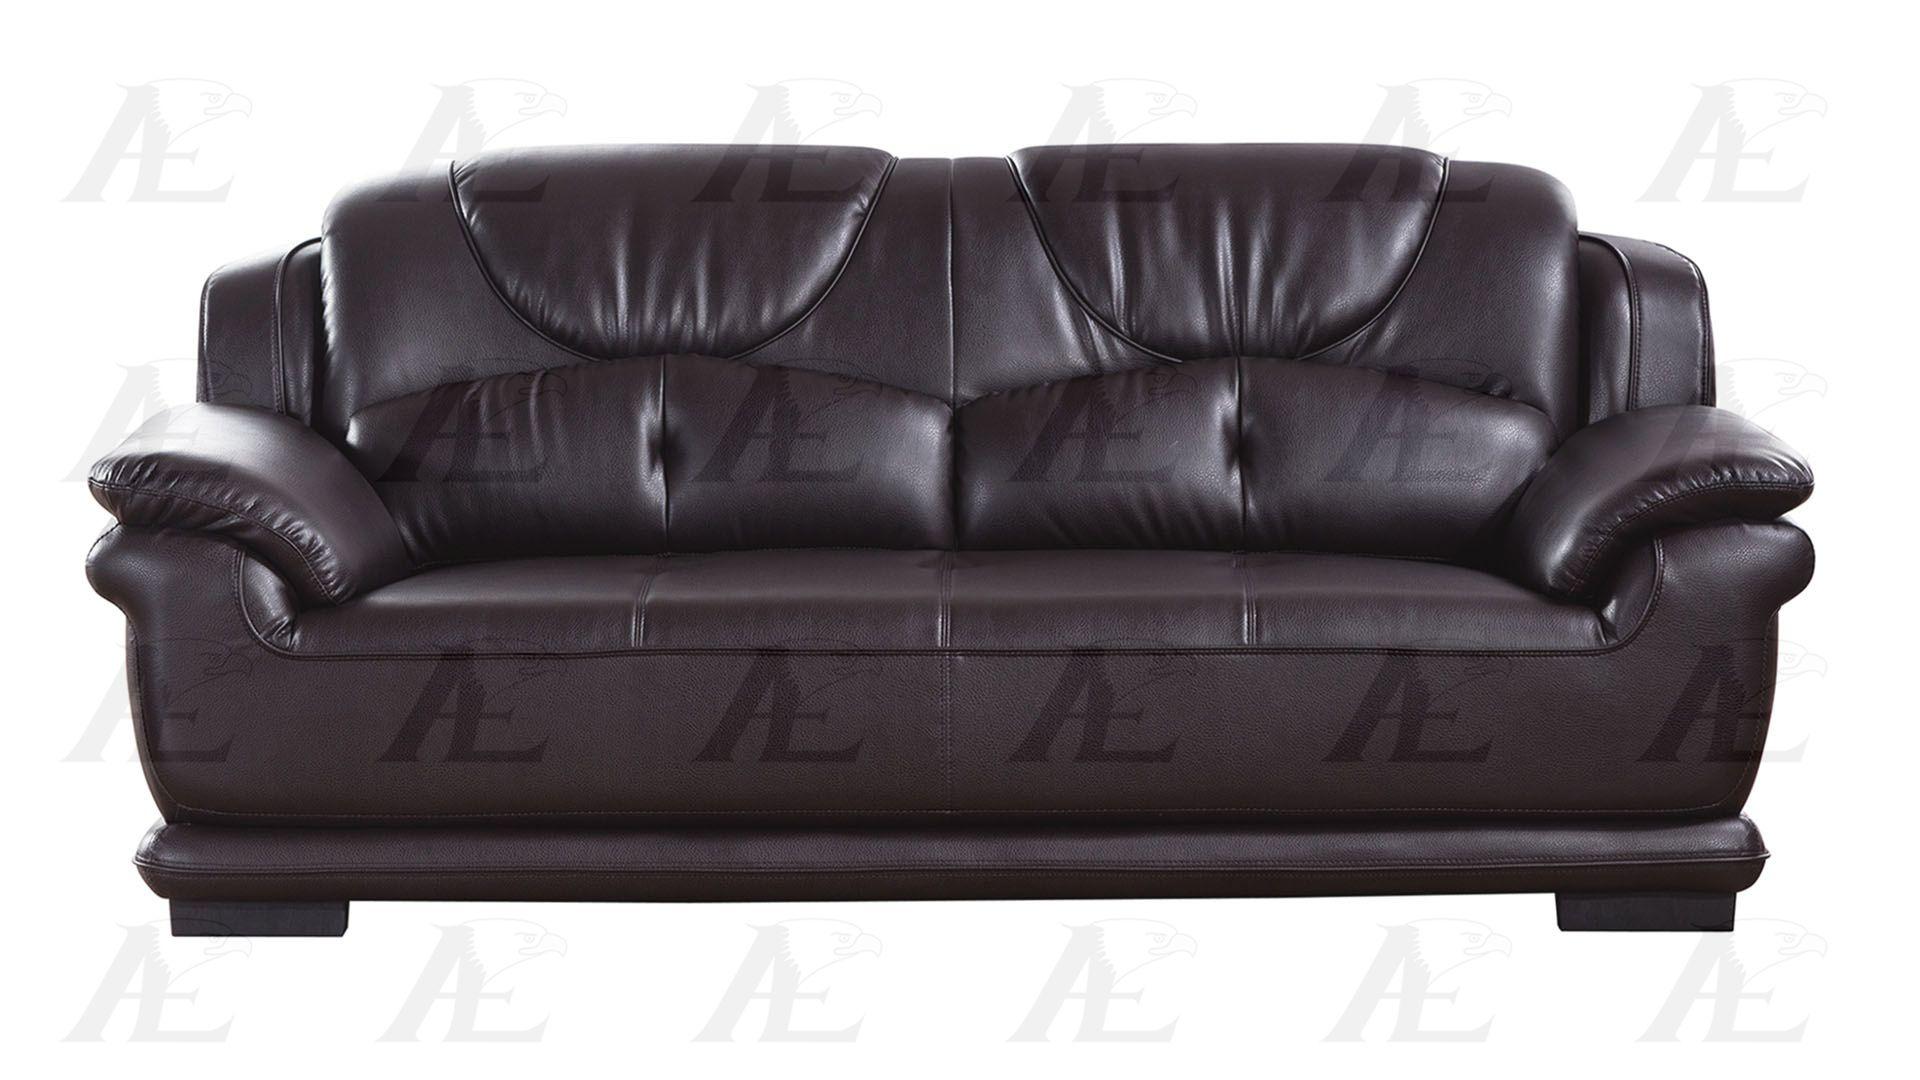 

    
American Eagle Furniture  AE601-DC Dark Chocolate Faux Leather Sofa Loveseat and Chair Set Bonded Leather 3Pcs
